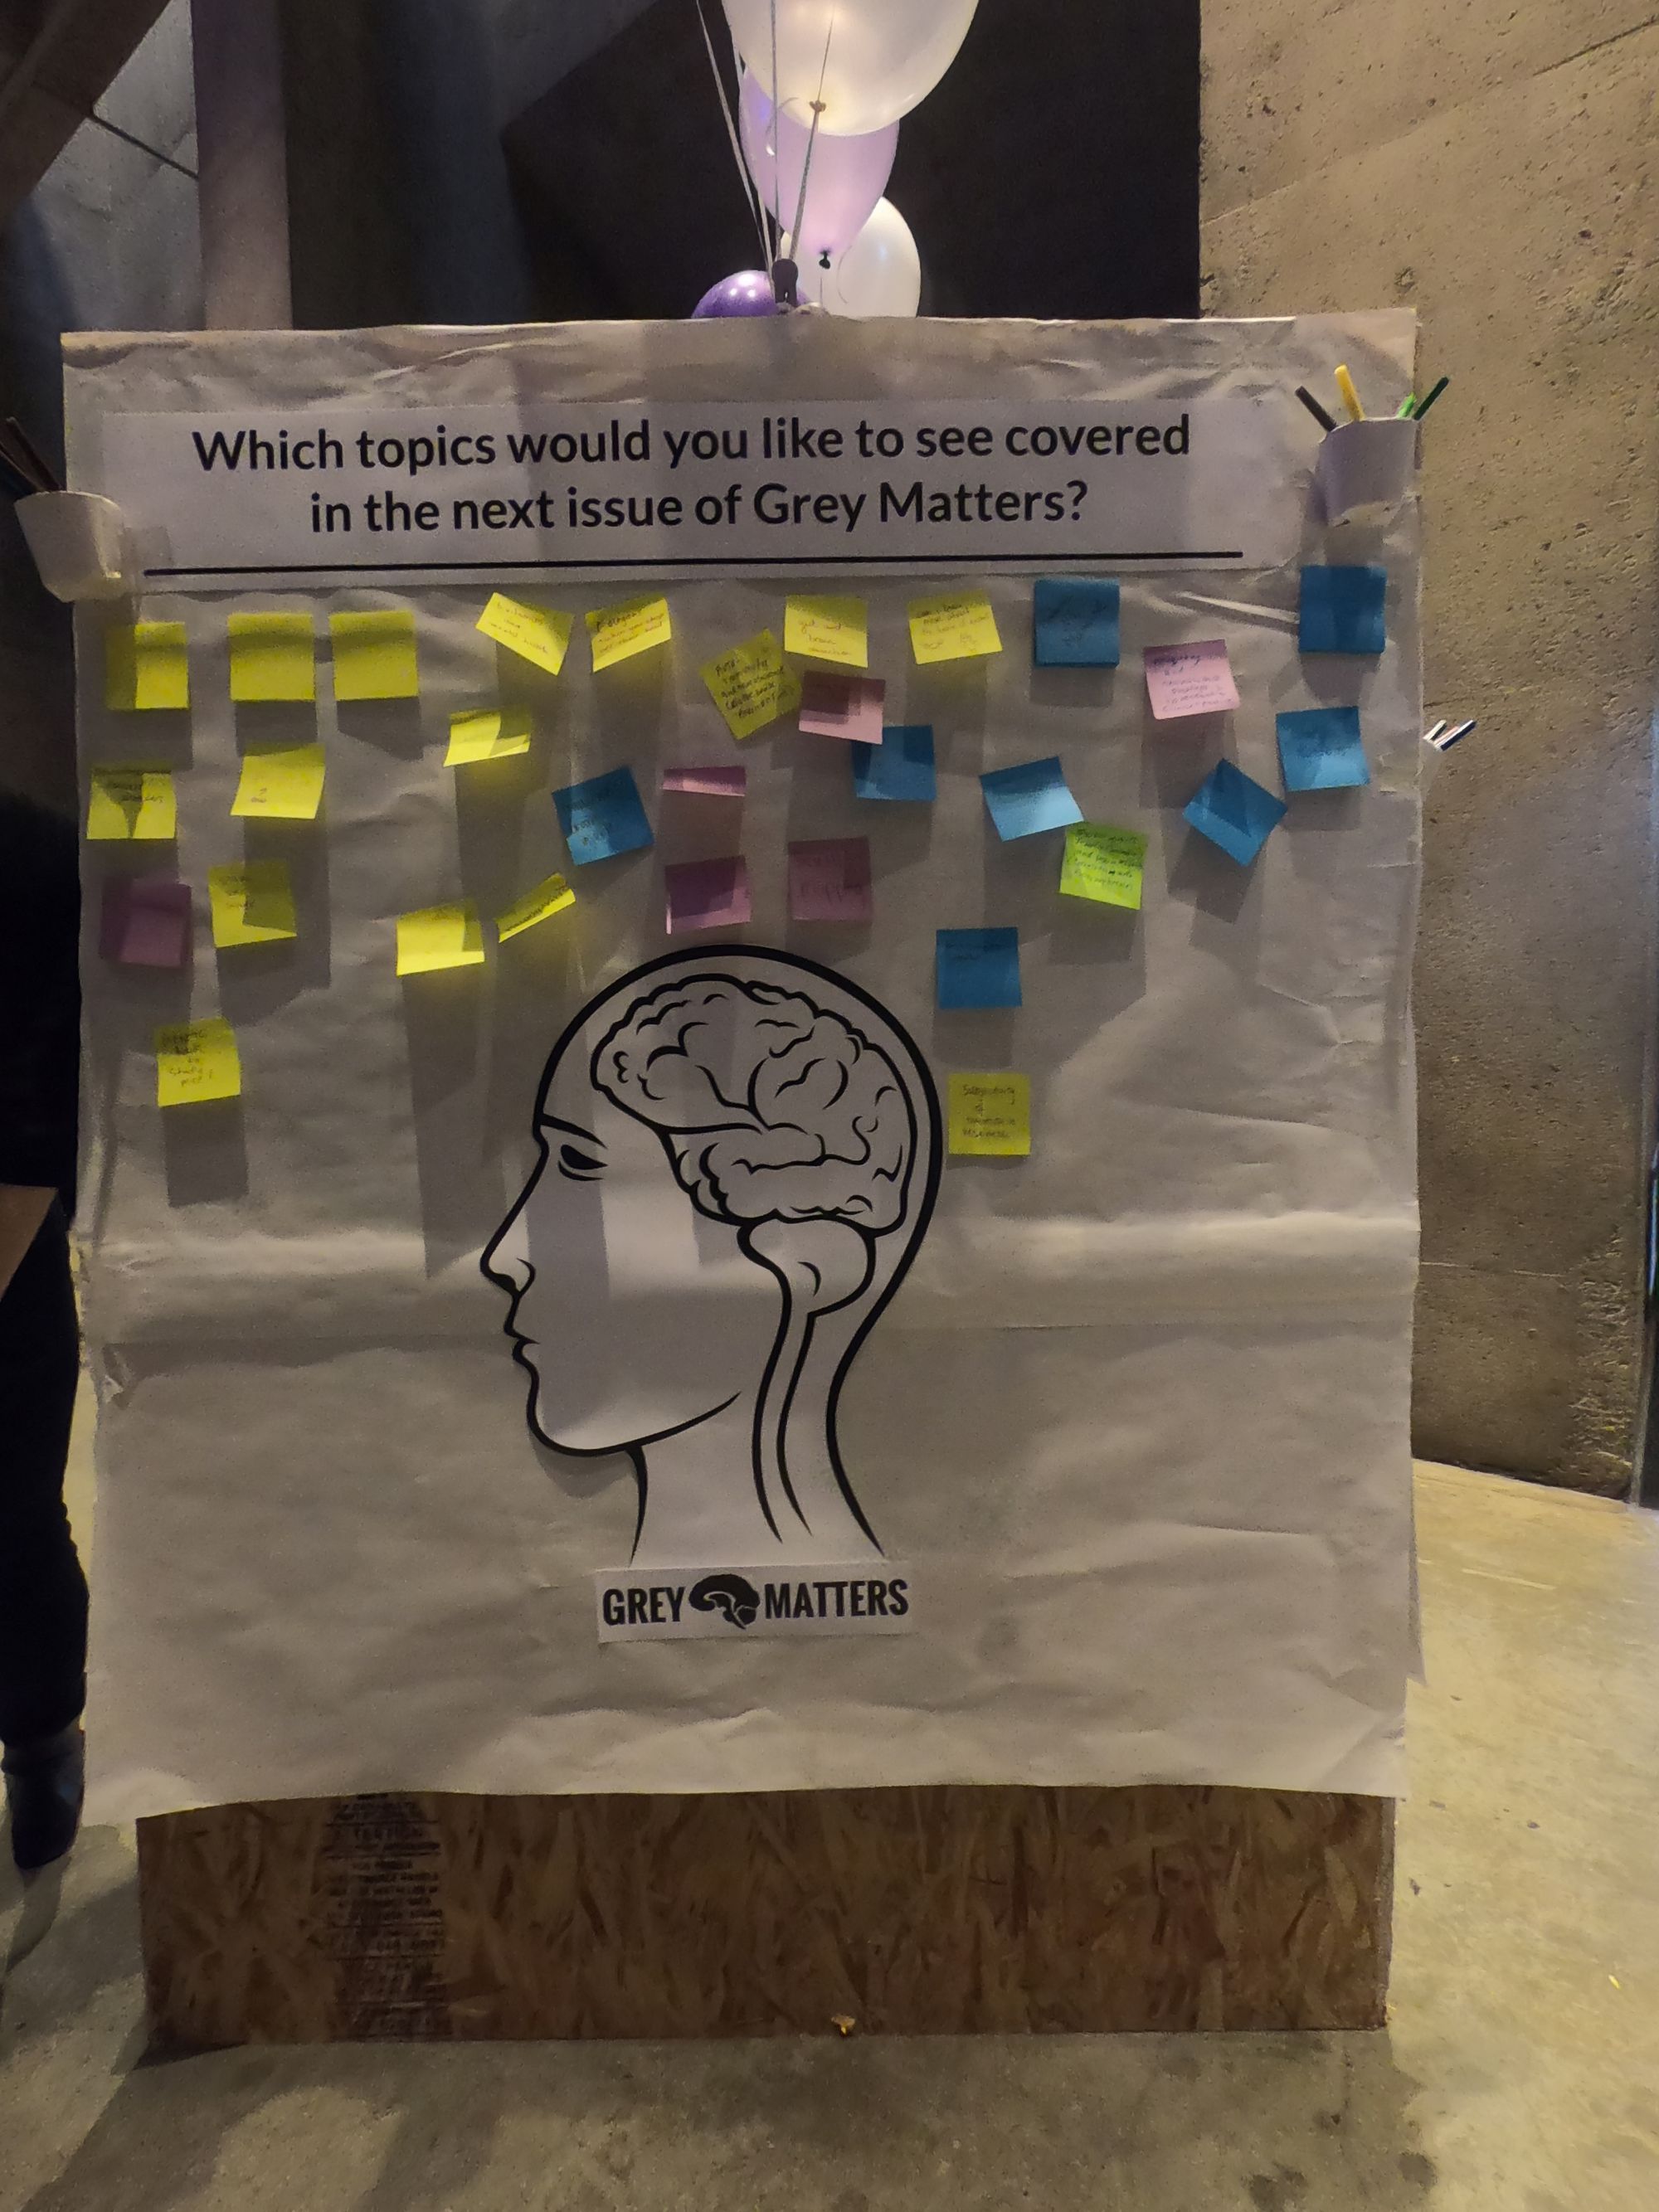 The middle left image shows a board with a large piece of paper on it with the question: 'What topics would you like to see covered in the next issue of Grey Matters?' and multicolored sticky notes on it that attendees put on with their desired topics.